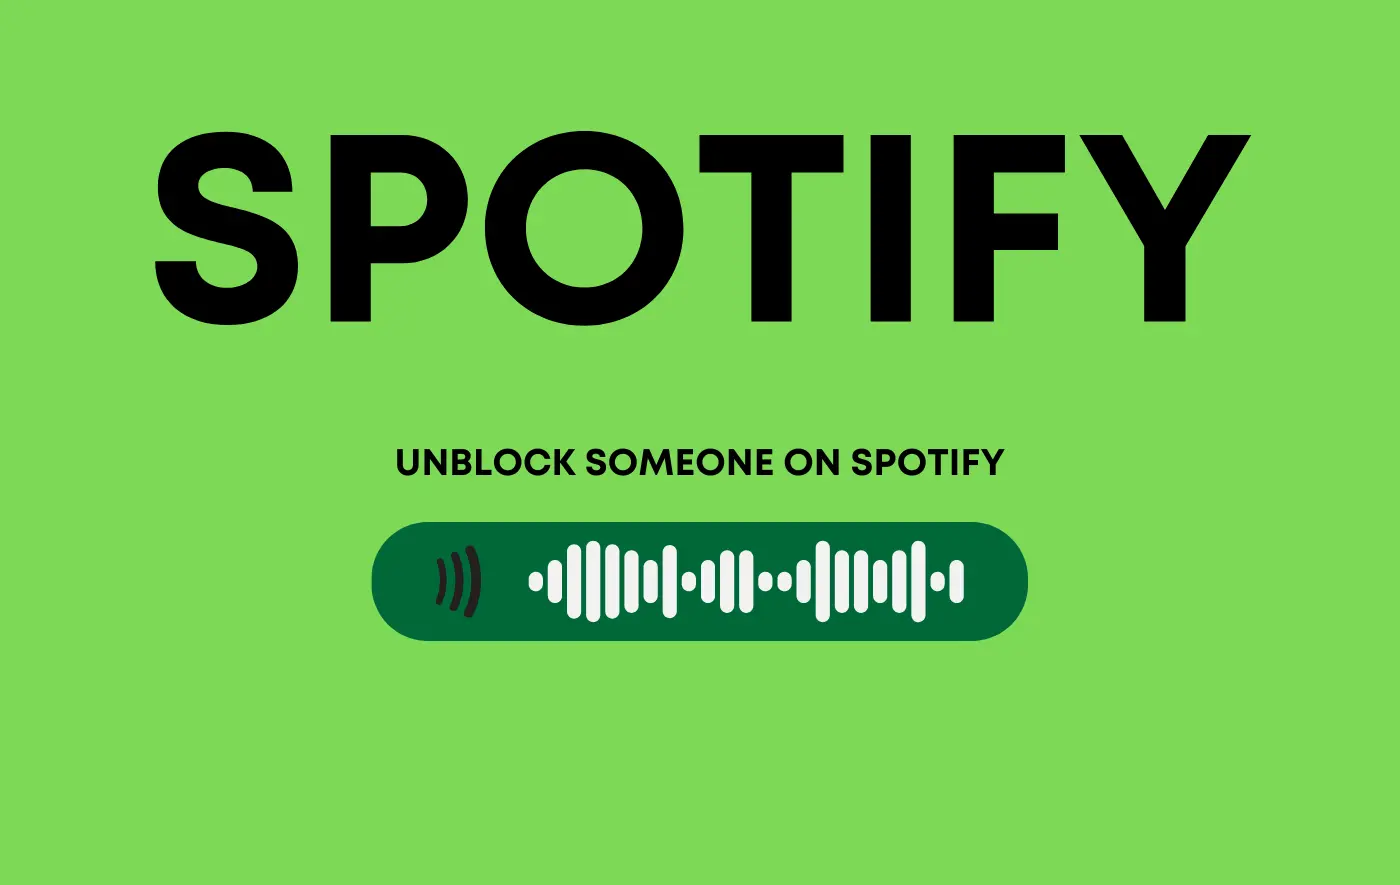 How to Unblock someone on Spotify